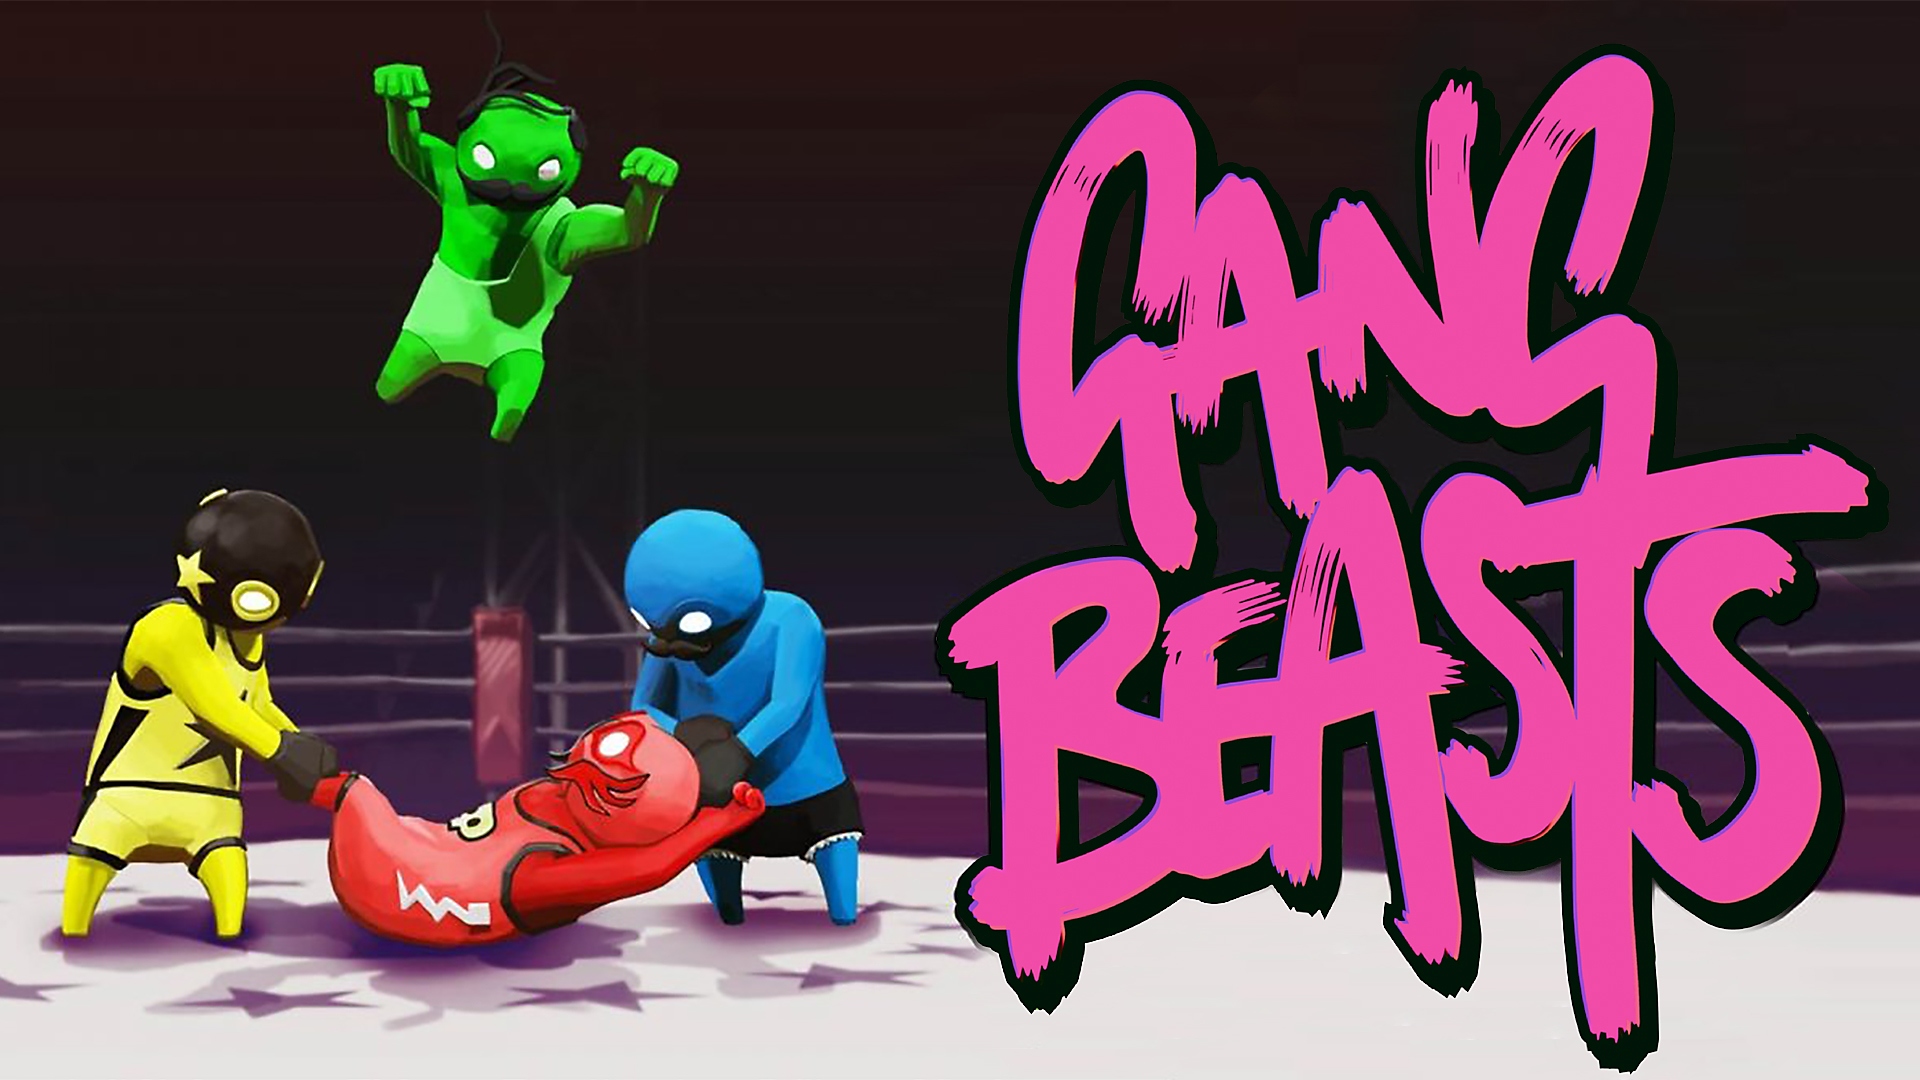 Gang Beasts - Gameplay Trailer | PS4